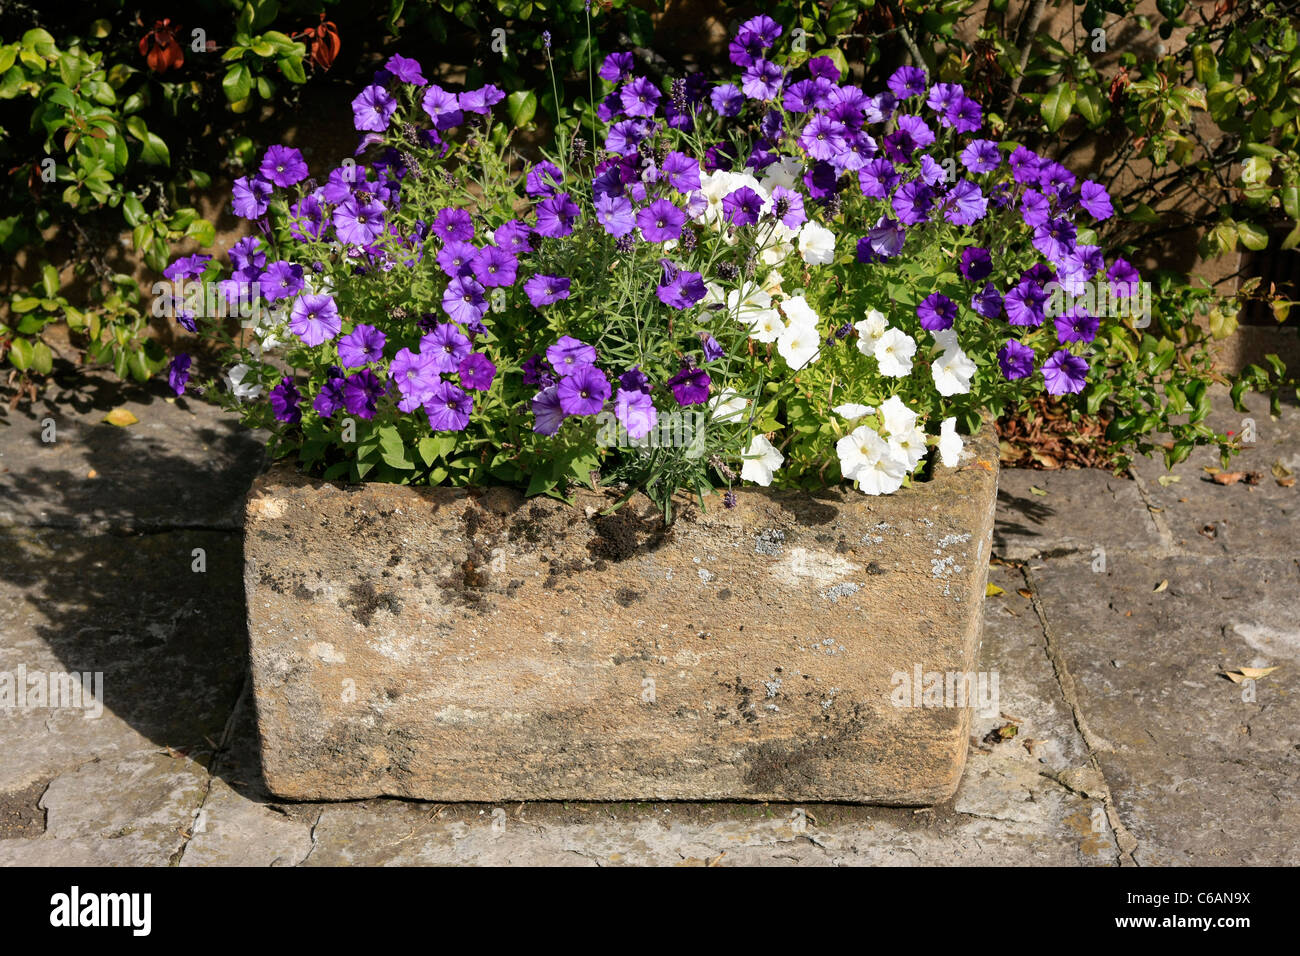 Mixed Petunia's along with Lavender in a concrete trough outside a house in England Stock Photo